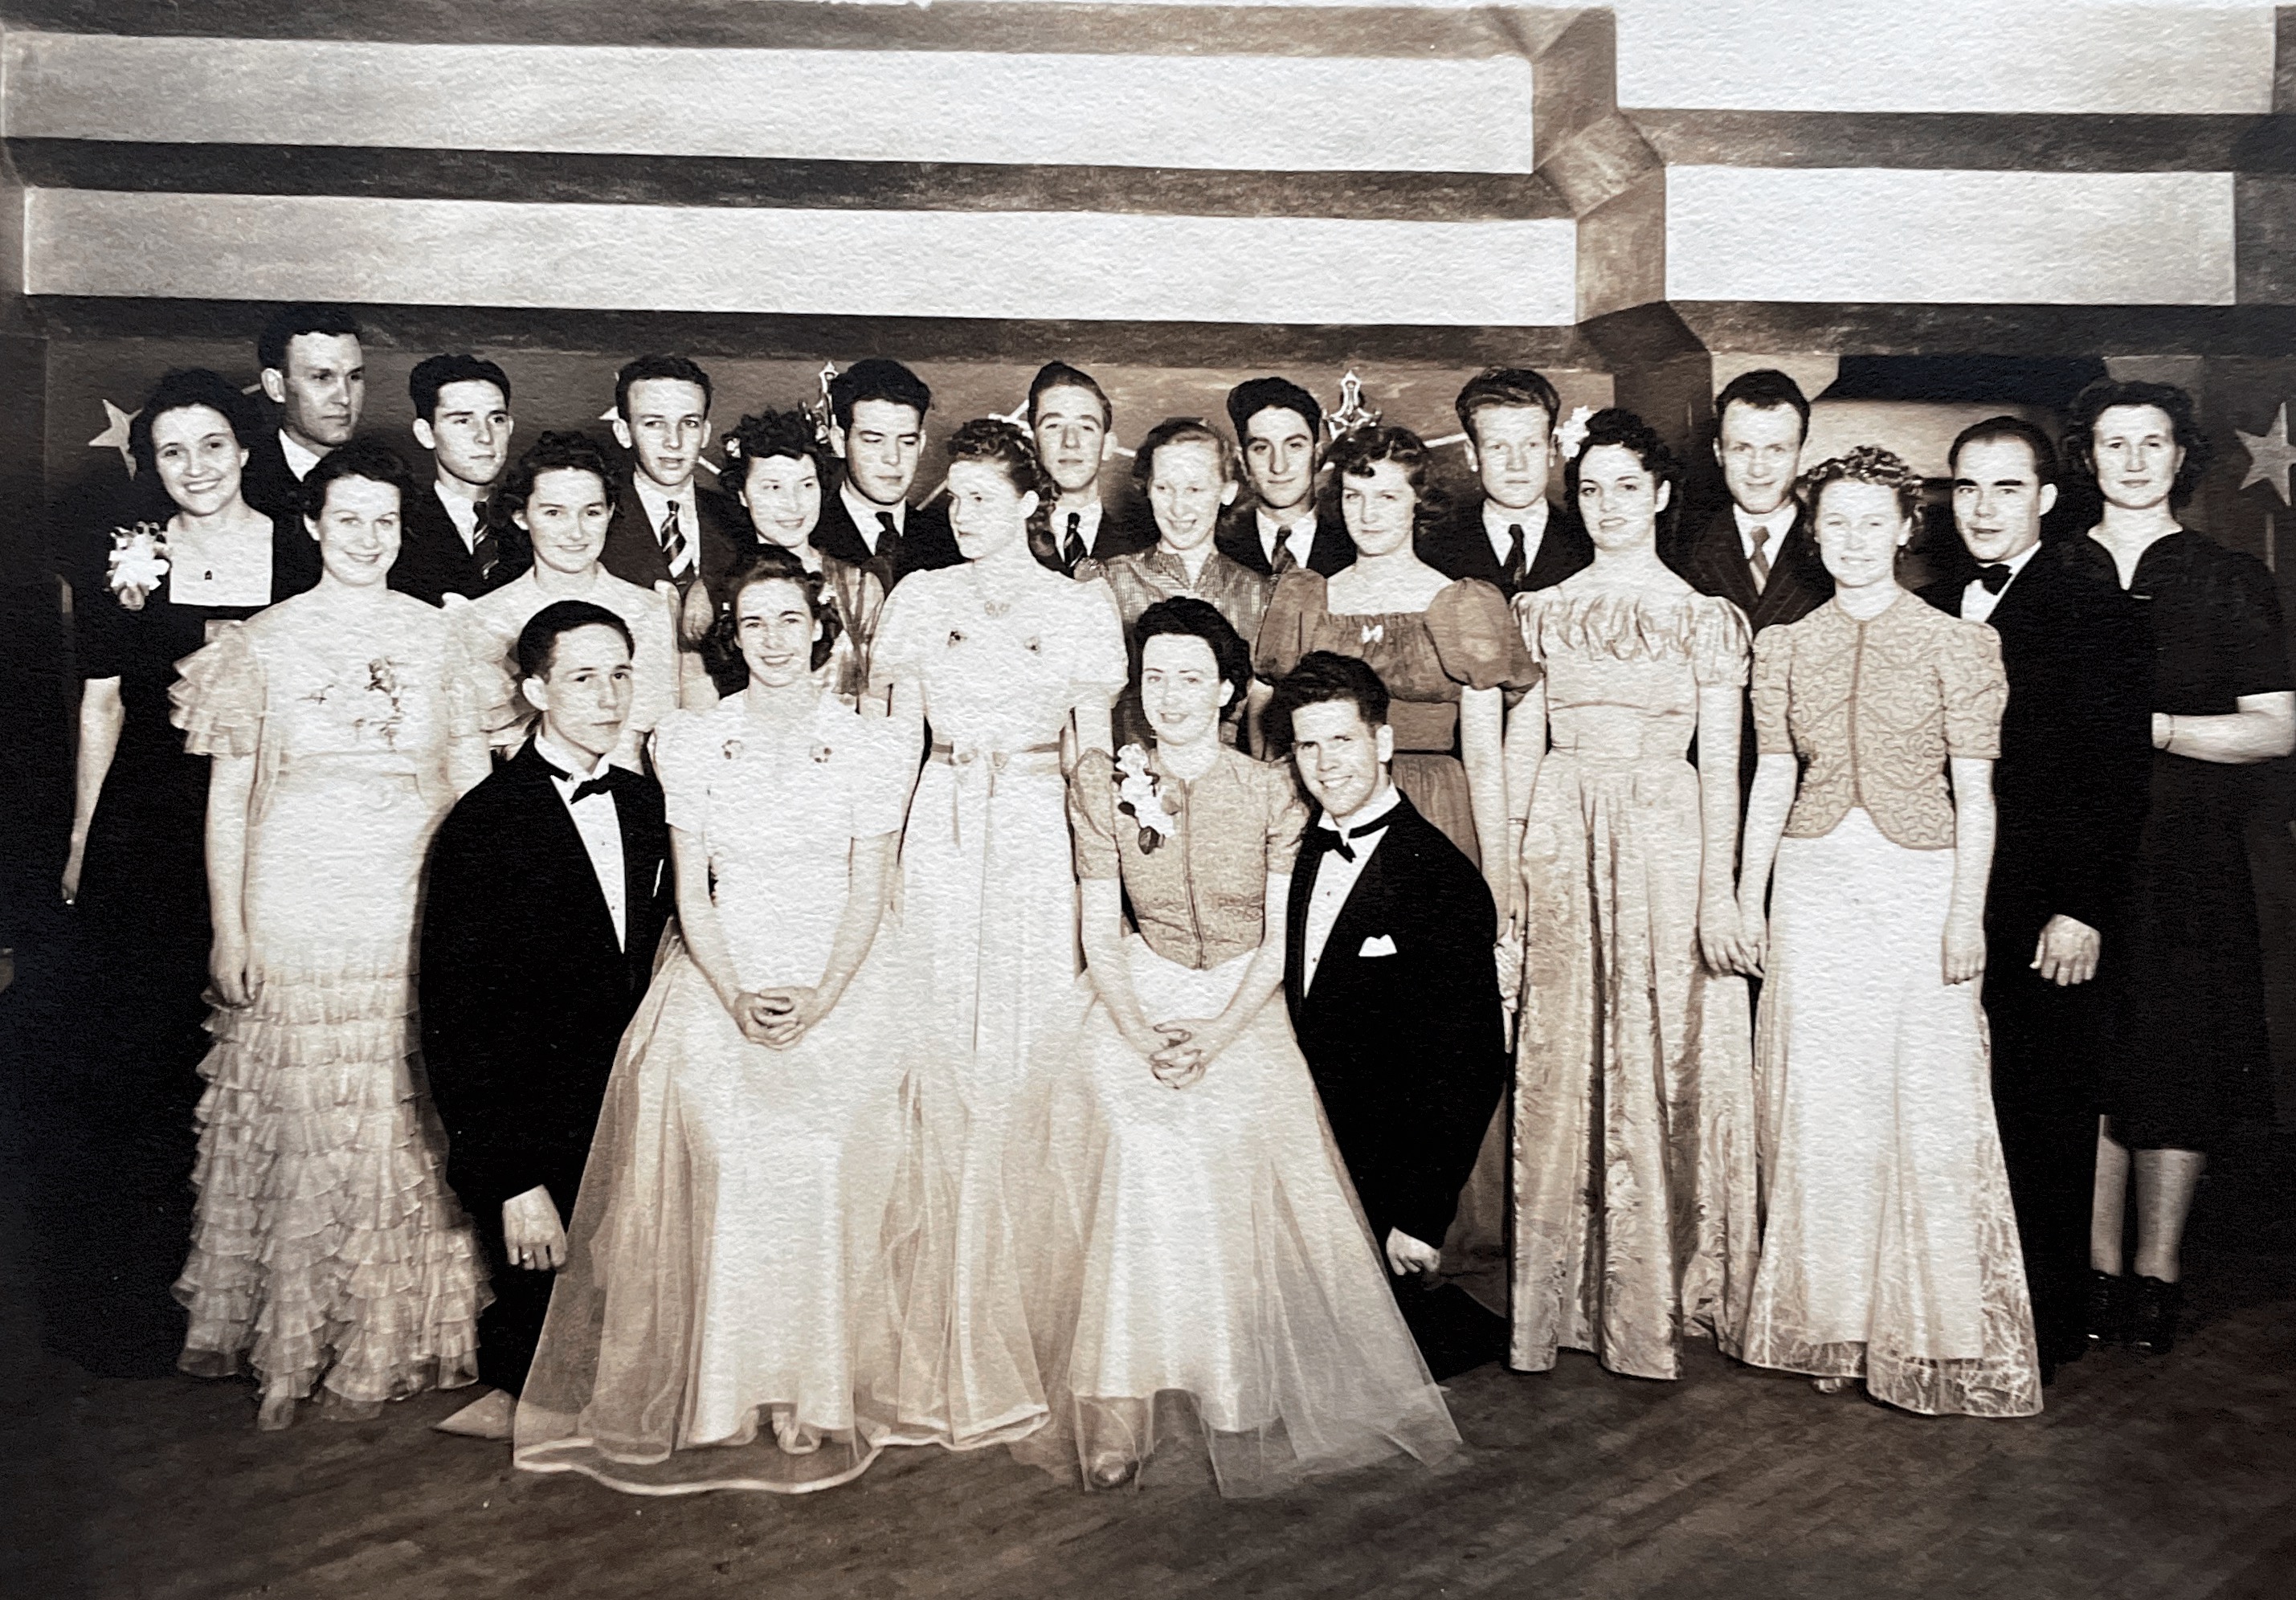 Mary Jane standing front snd center  She lived to dance !! About 1940